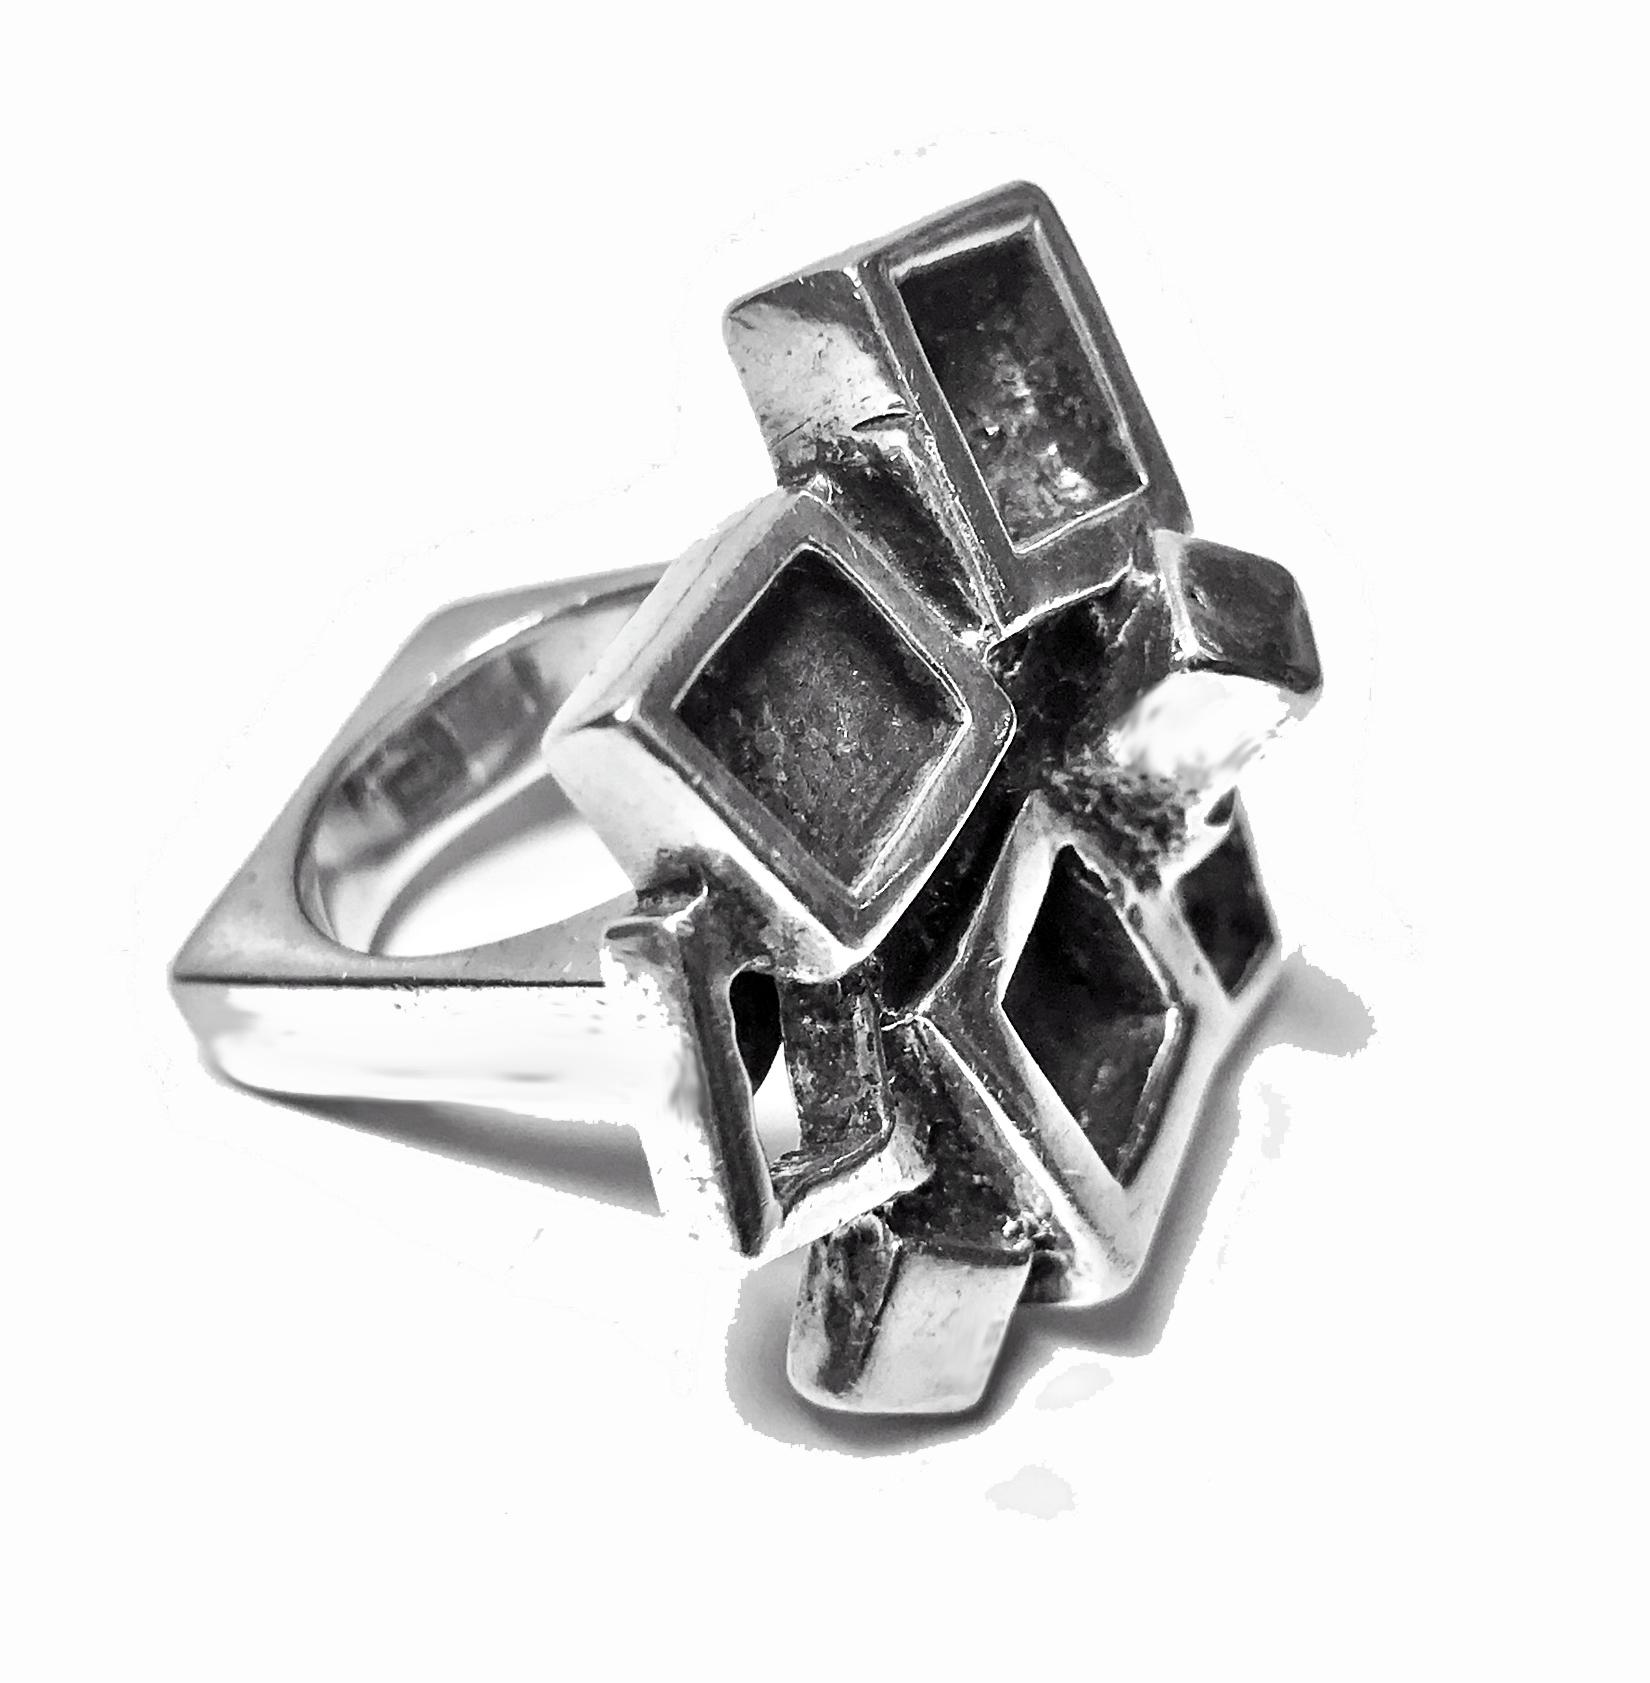 1960's Sterling Silver Modernist Brutalist Ring. Square comfort shank. Size7.5. Top maximum dimensions 3.25 x 3.0 cm. Item Weight: 35.31 grams.